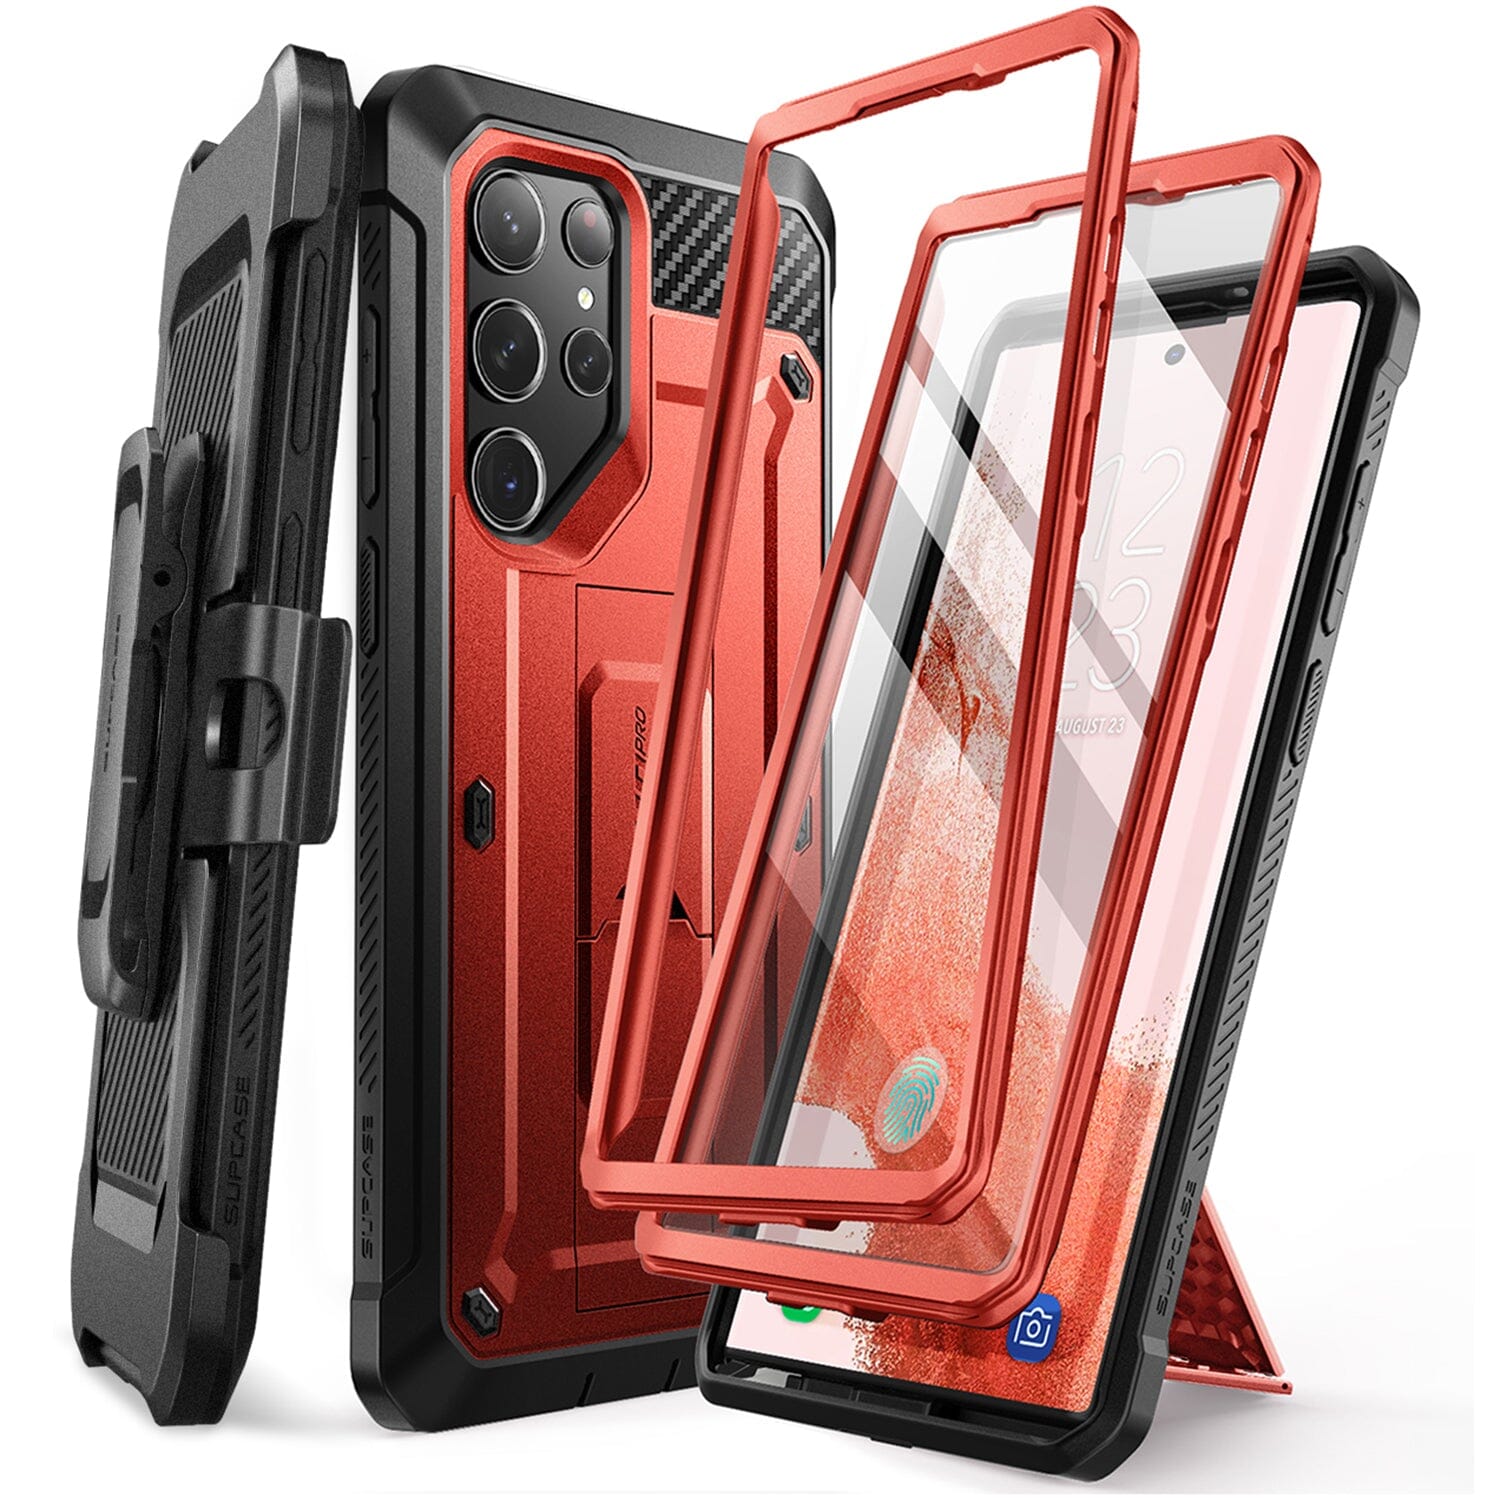 SUPCASE Unicorn Beetle Pro Case for Samsung Galaxy S23 Ultra 5G (2023 Release), [Extra Front Frame] Full-Body Dual Layer Rugged Belt-Clip & Kickstand Case with Built-in Screen Protector ONE2WORLD Metallic Red 